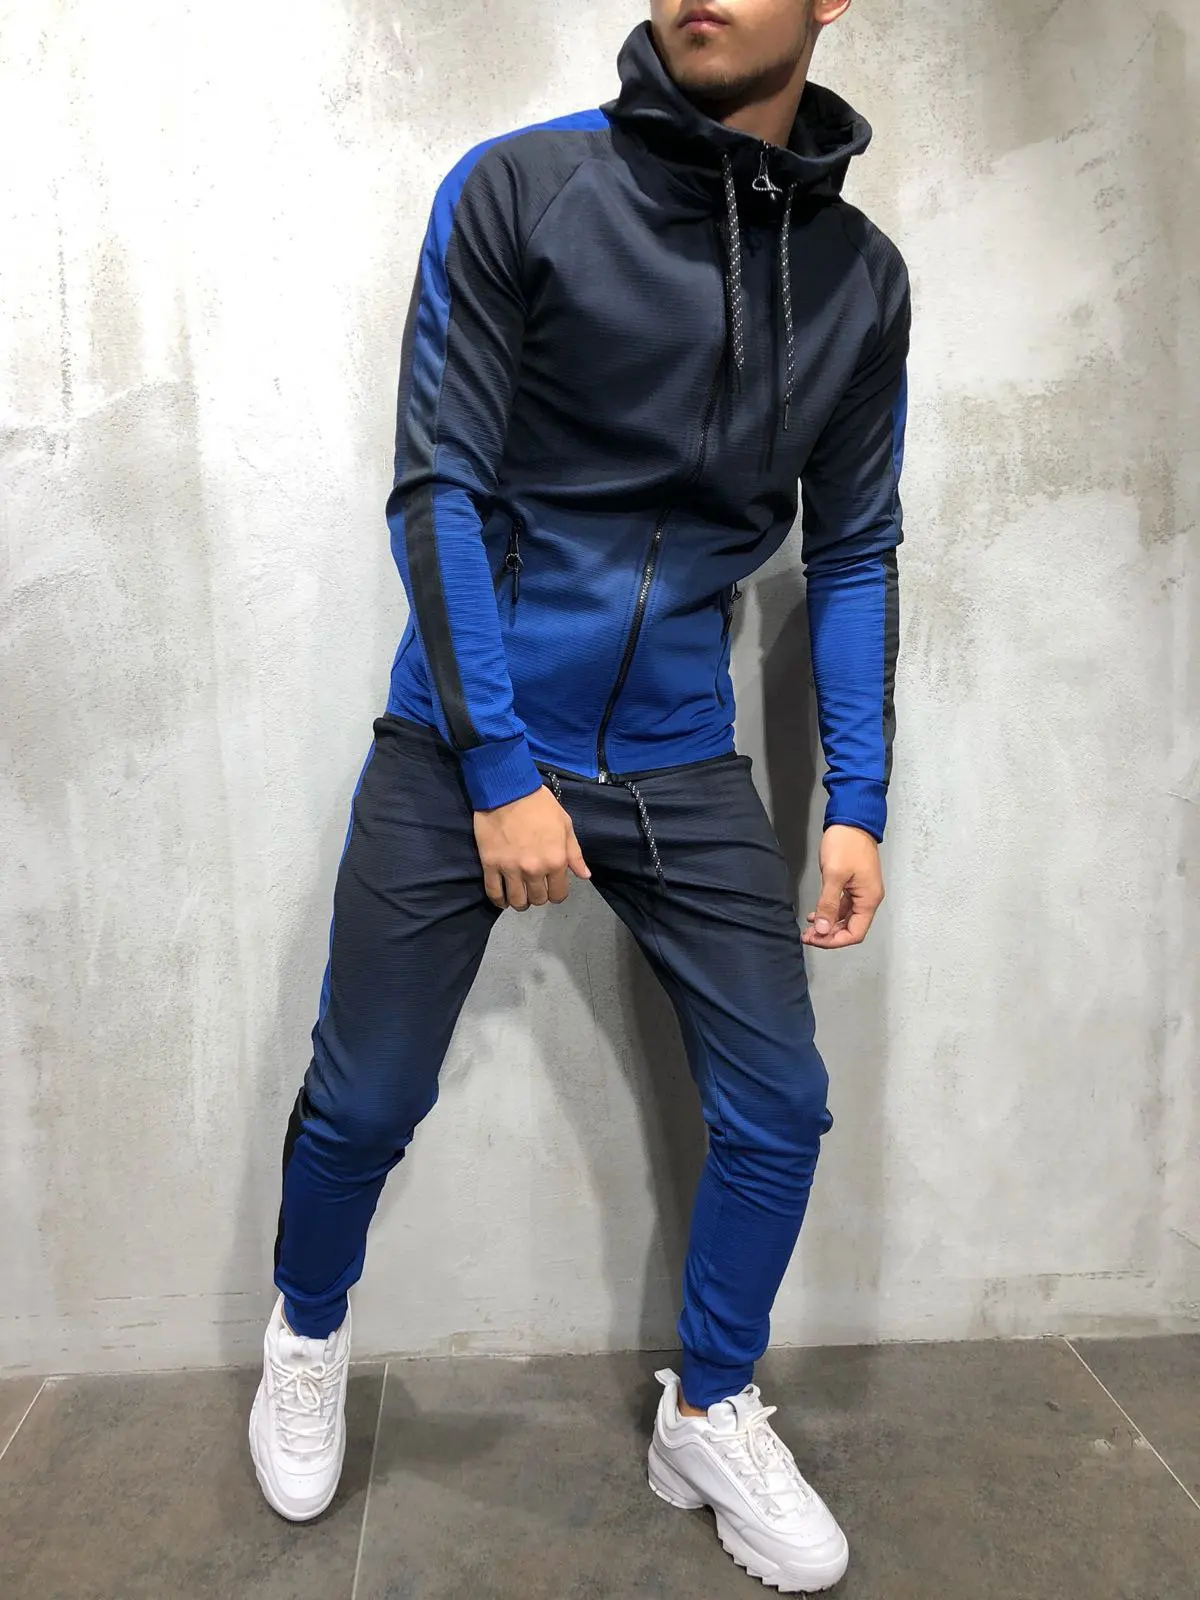 2019 On Sale Fashion Male Tracksuit Casual Autumn Winter Mens Jacket ...